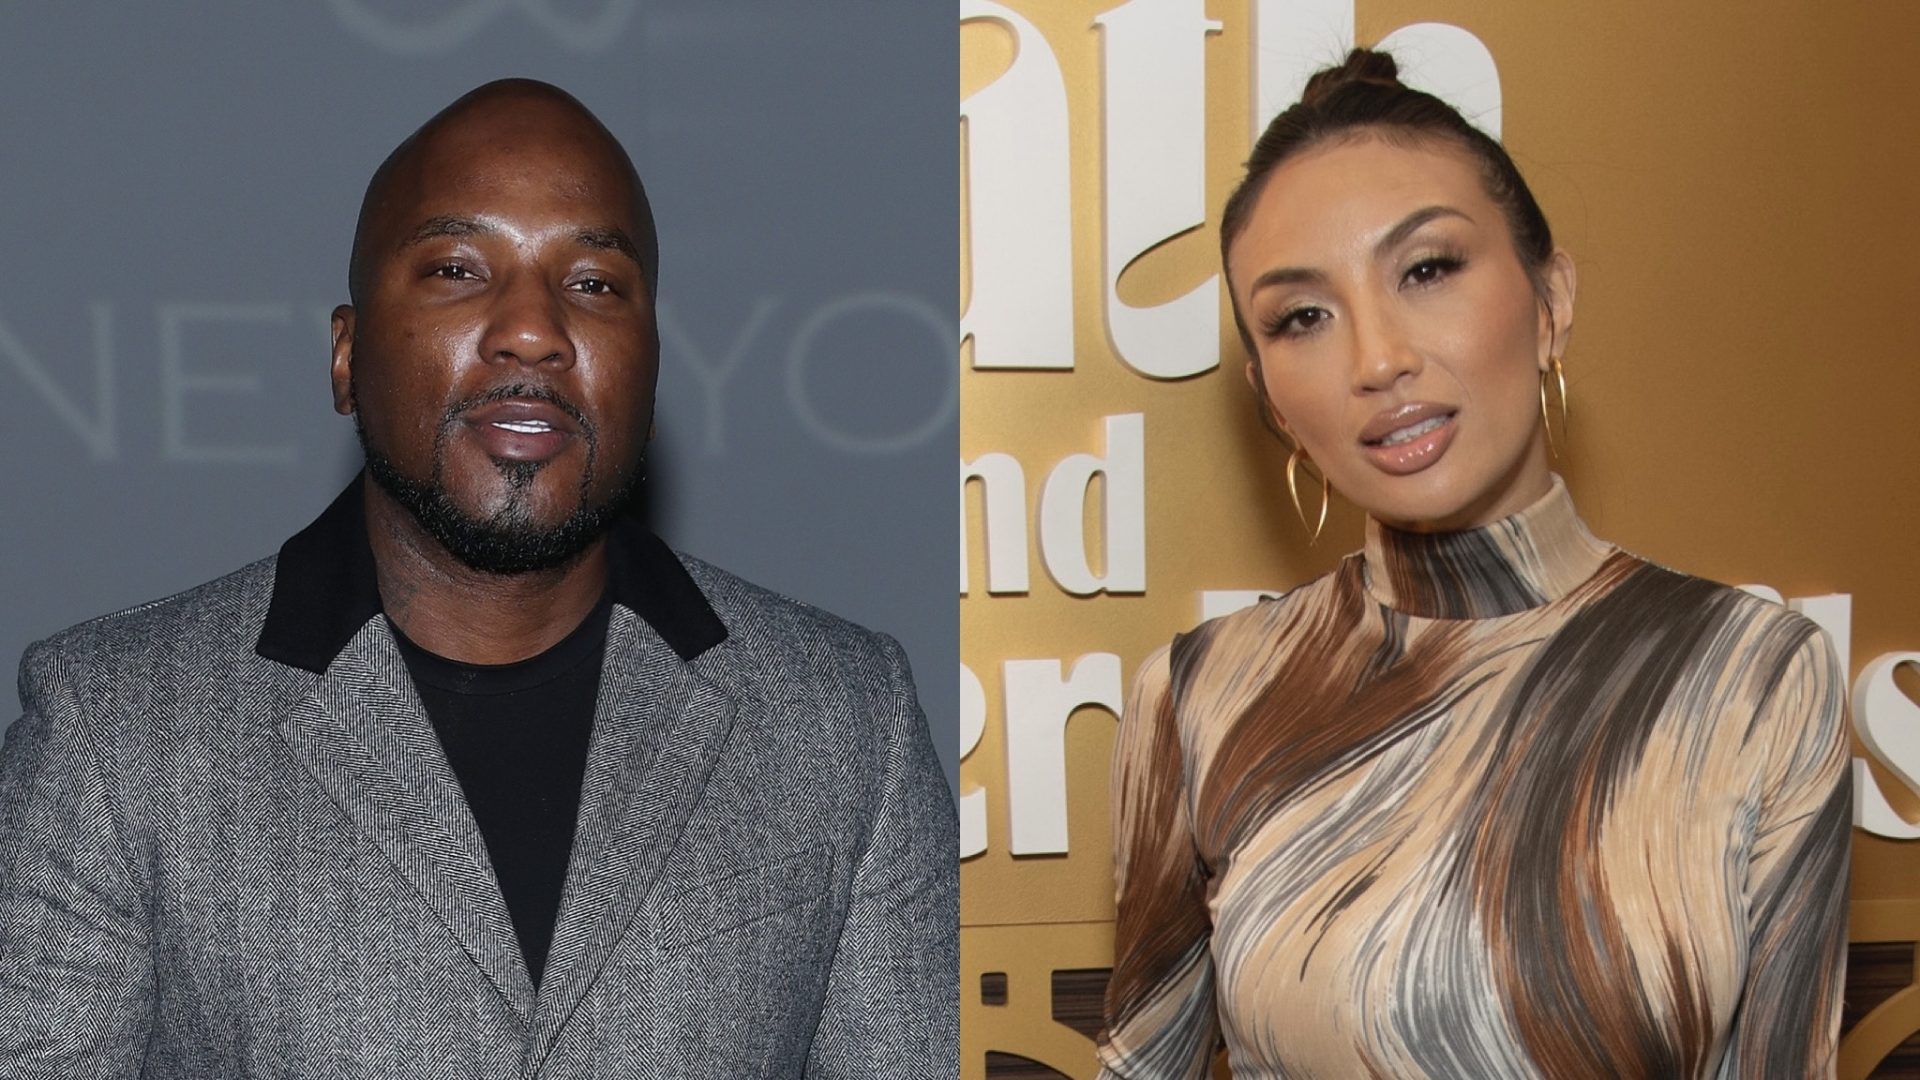 Jeezy Reportedly Clarifies Previous Motion Requesting Primary Custody Of 2 Year Old Daughter Shared With Jeannie Mai scaled